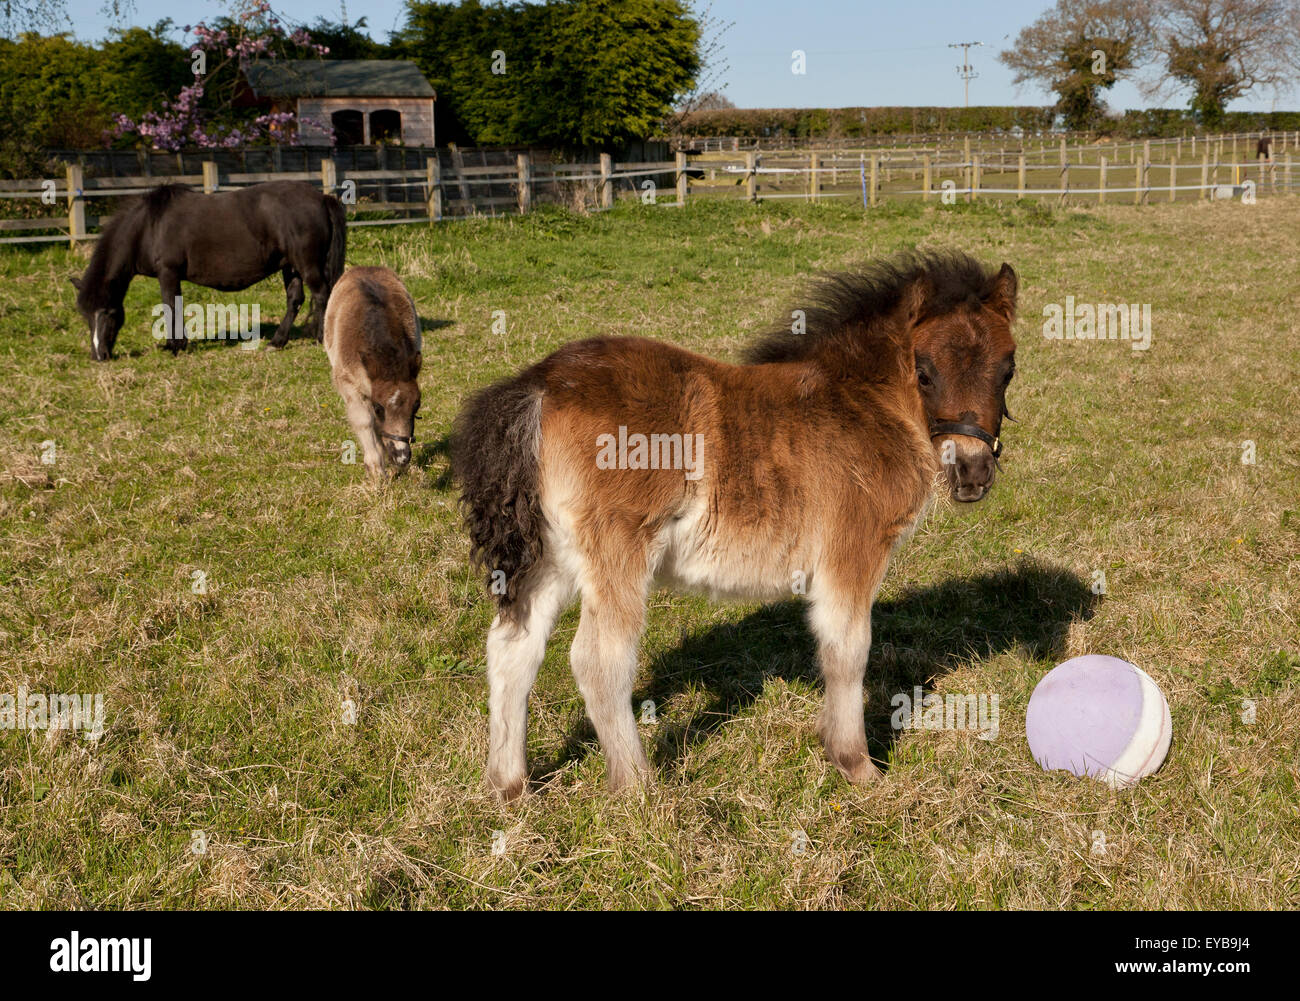 A mare and two foals in a field Stock Photo